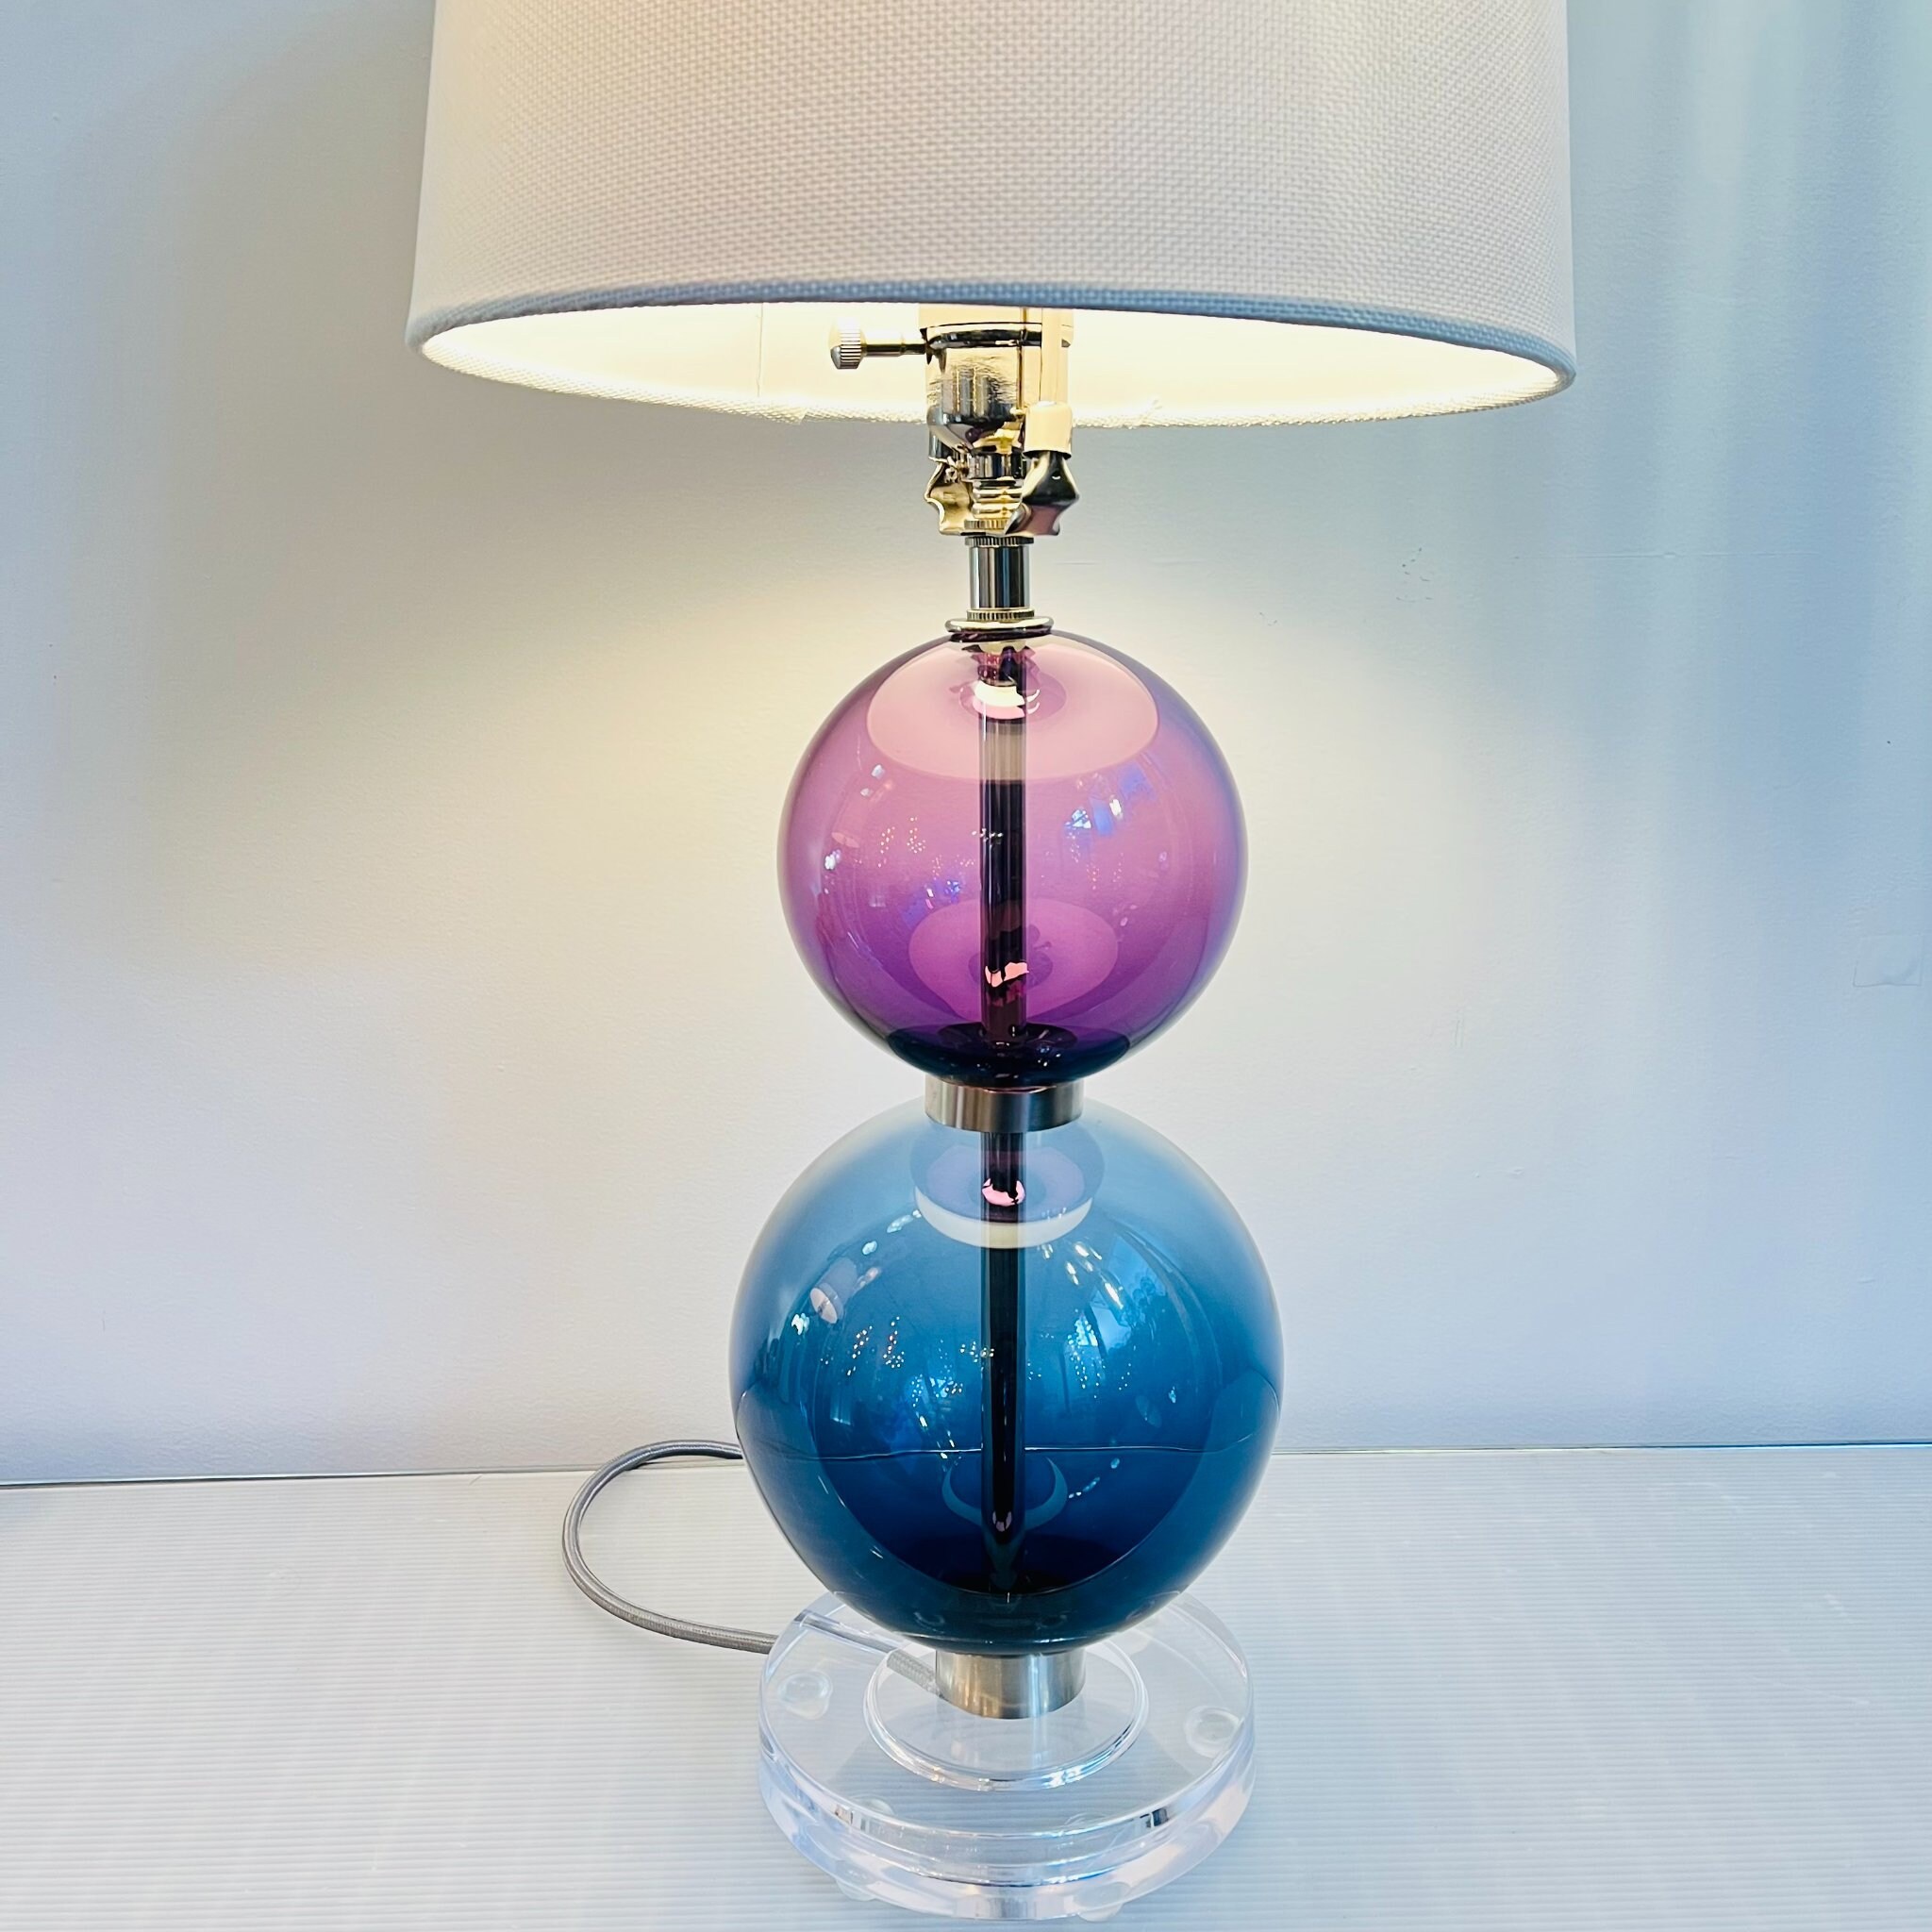 LED Modern/Contemporary Decorative Metal Ball Floor Lamp at Rs